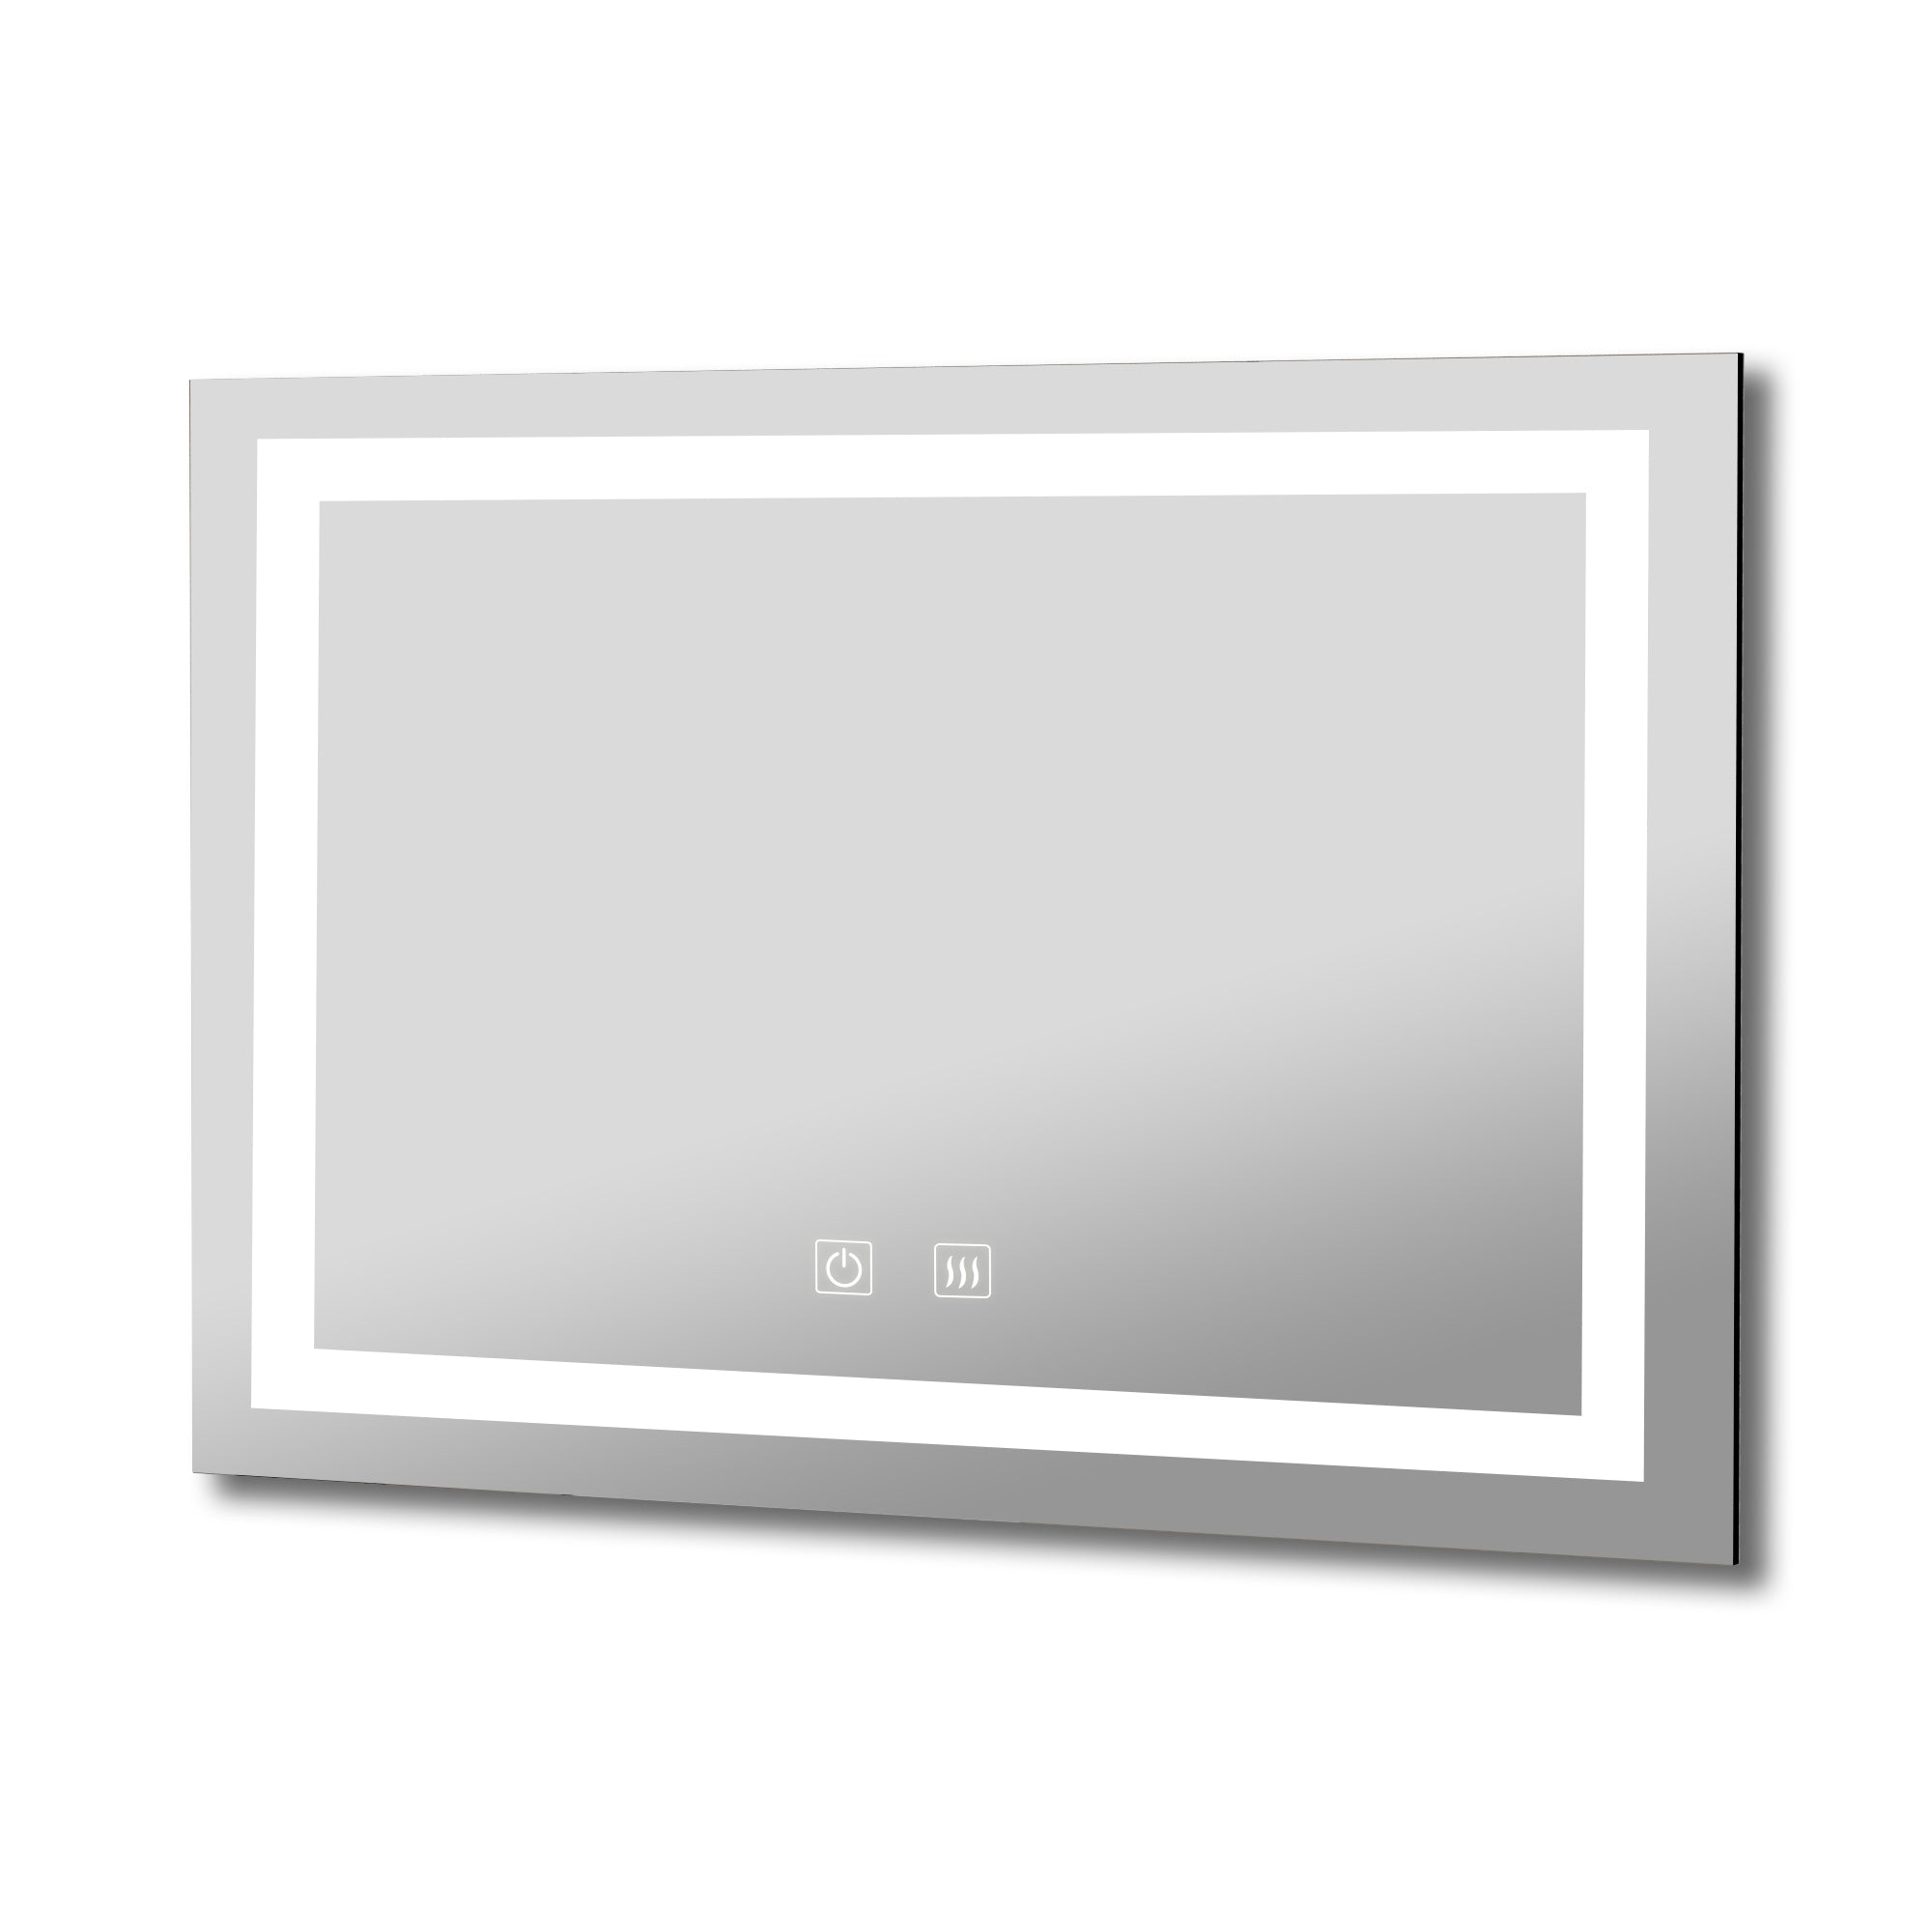 MAICOSY 36"x28" LED Bathroom Mirror Vanity Makeup Mirrors Touch Anti-fog Dimmable